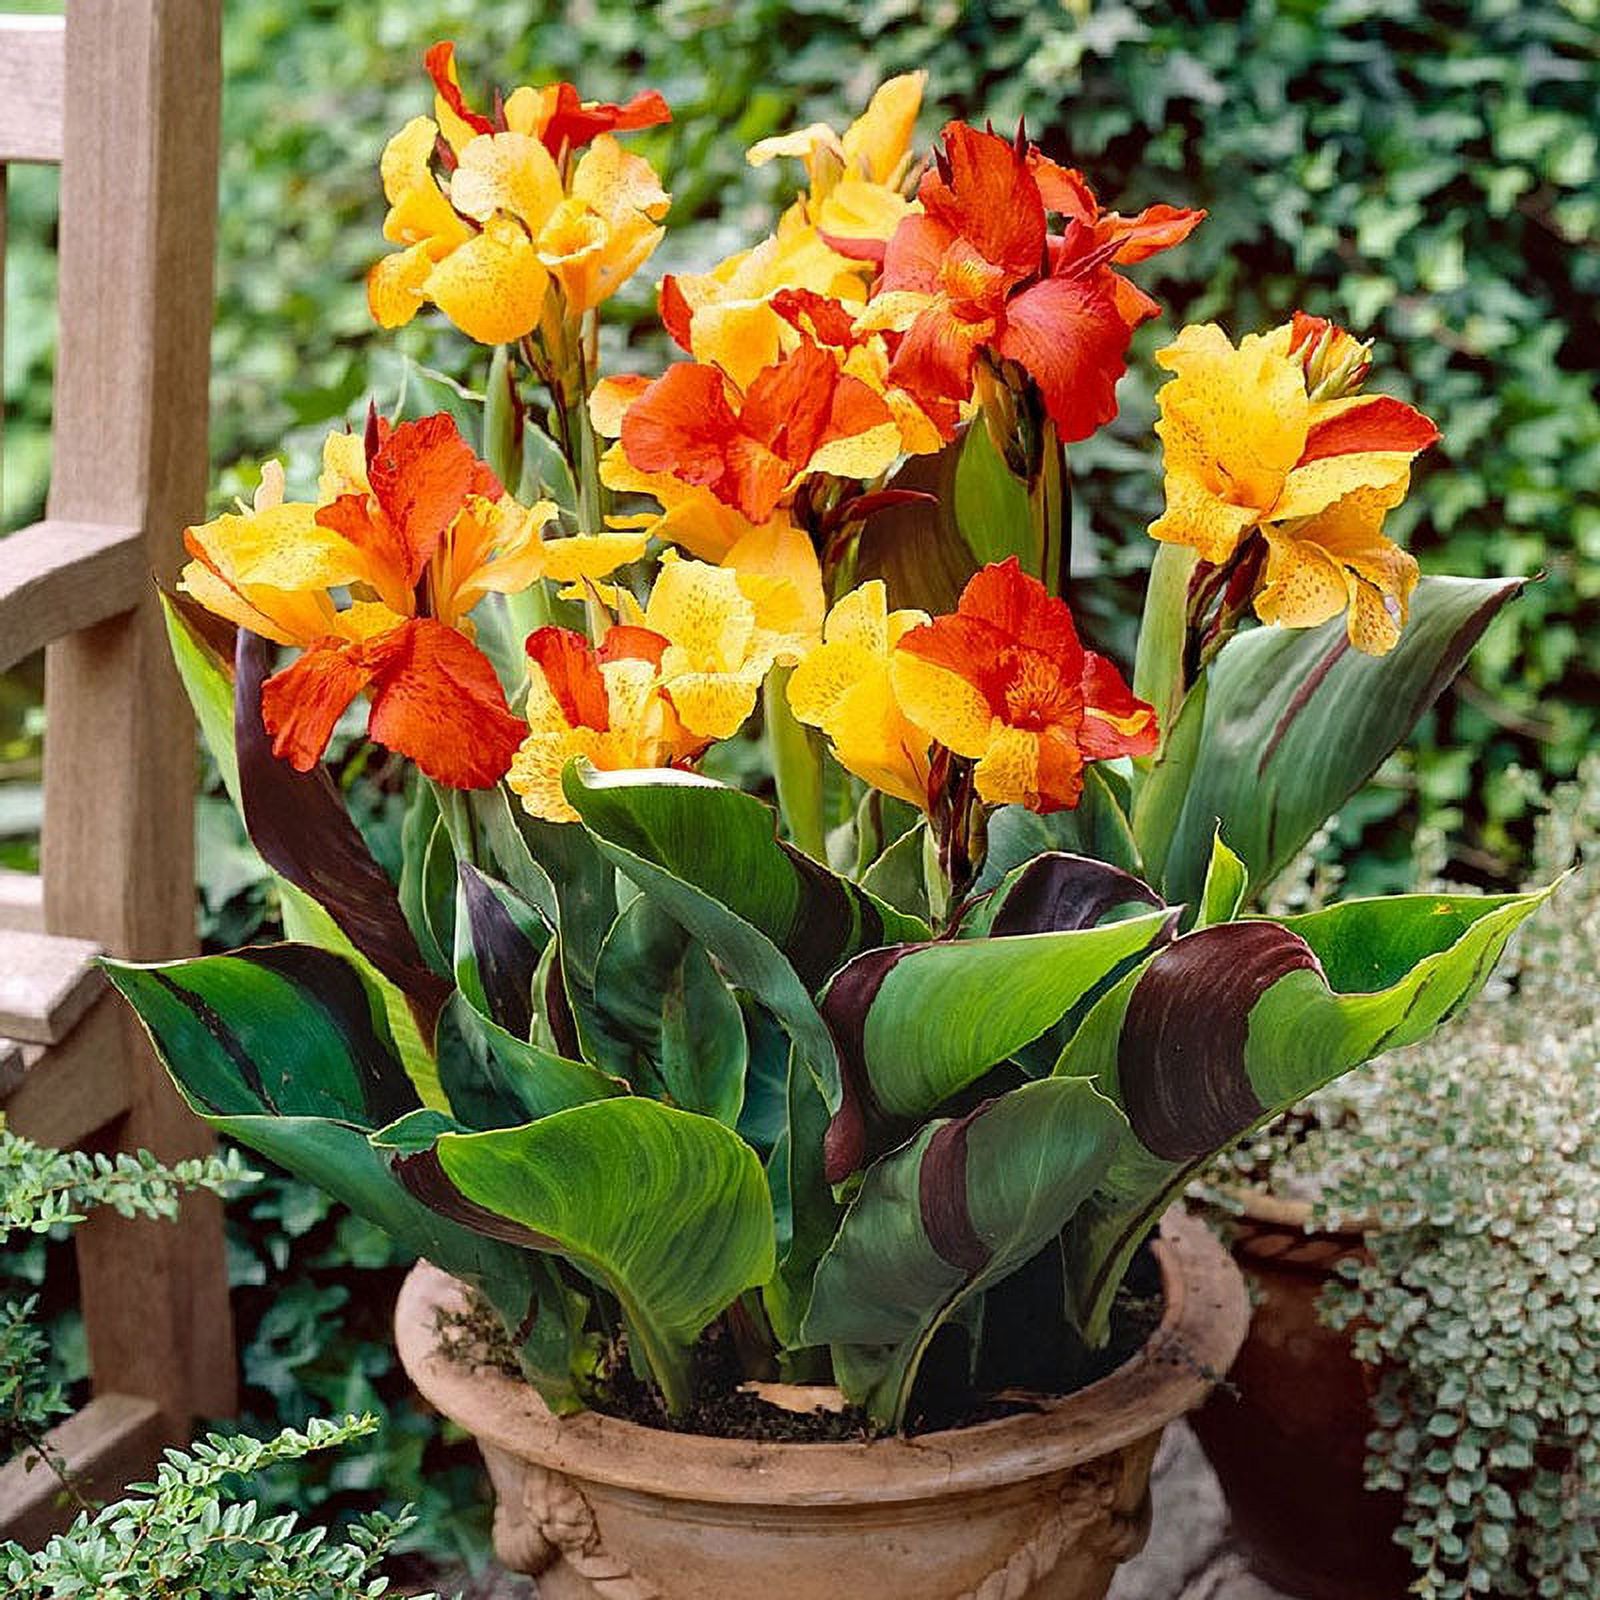 Canna Lily Bulbs - Cleopatra - 4 Bulbs - Red/Yellow Flower Bulbs,  Bulb  Attracts Bees, Attracts Butterflies, Attracts Hummingbirds, Attracts Pollinators, Easy to Grow & Maintain, Fast Growing - image 1 of 3